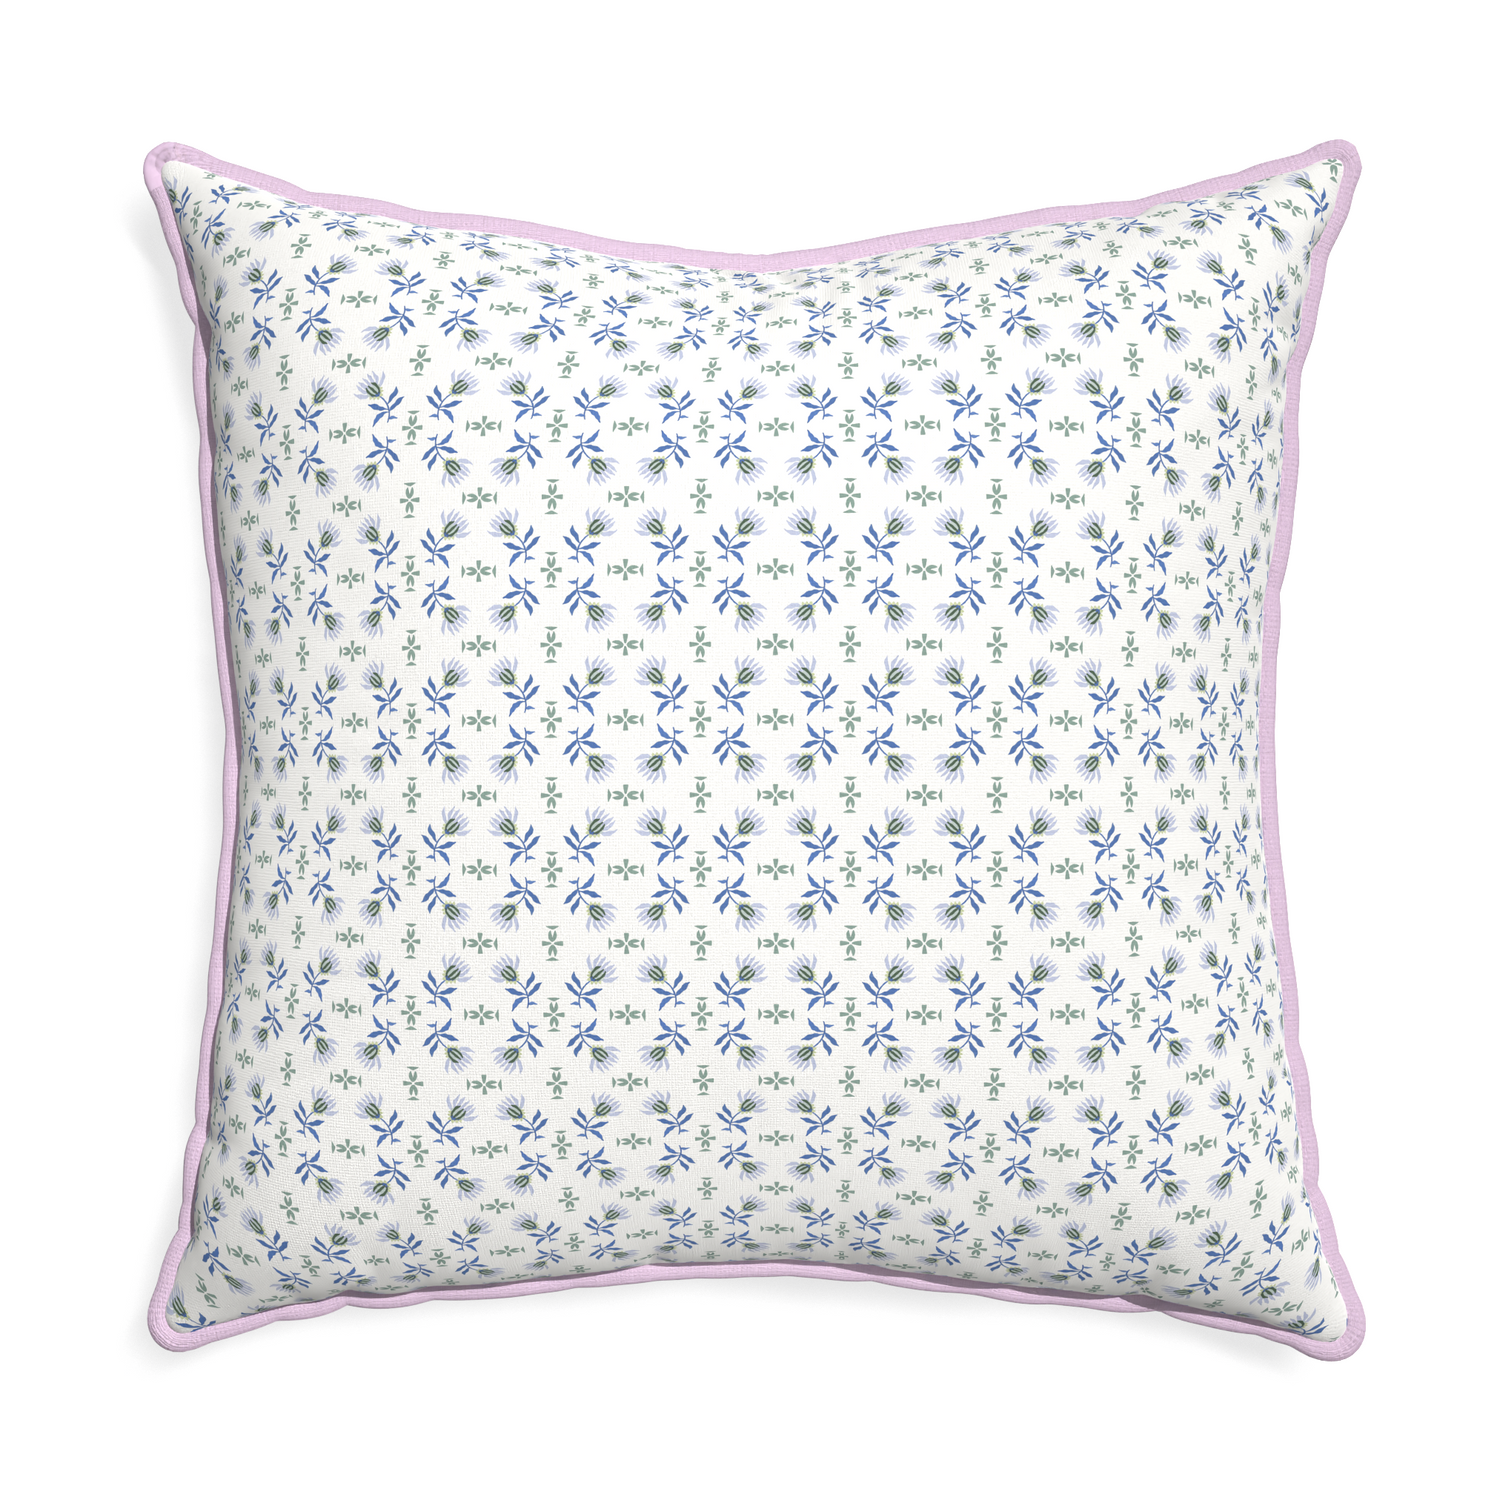 Euro-sham lee custom pillow with l piping on white background